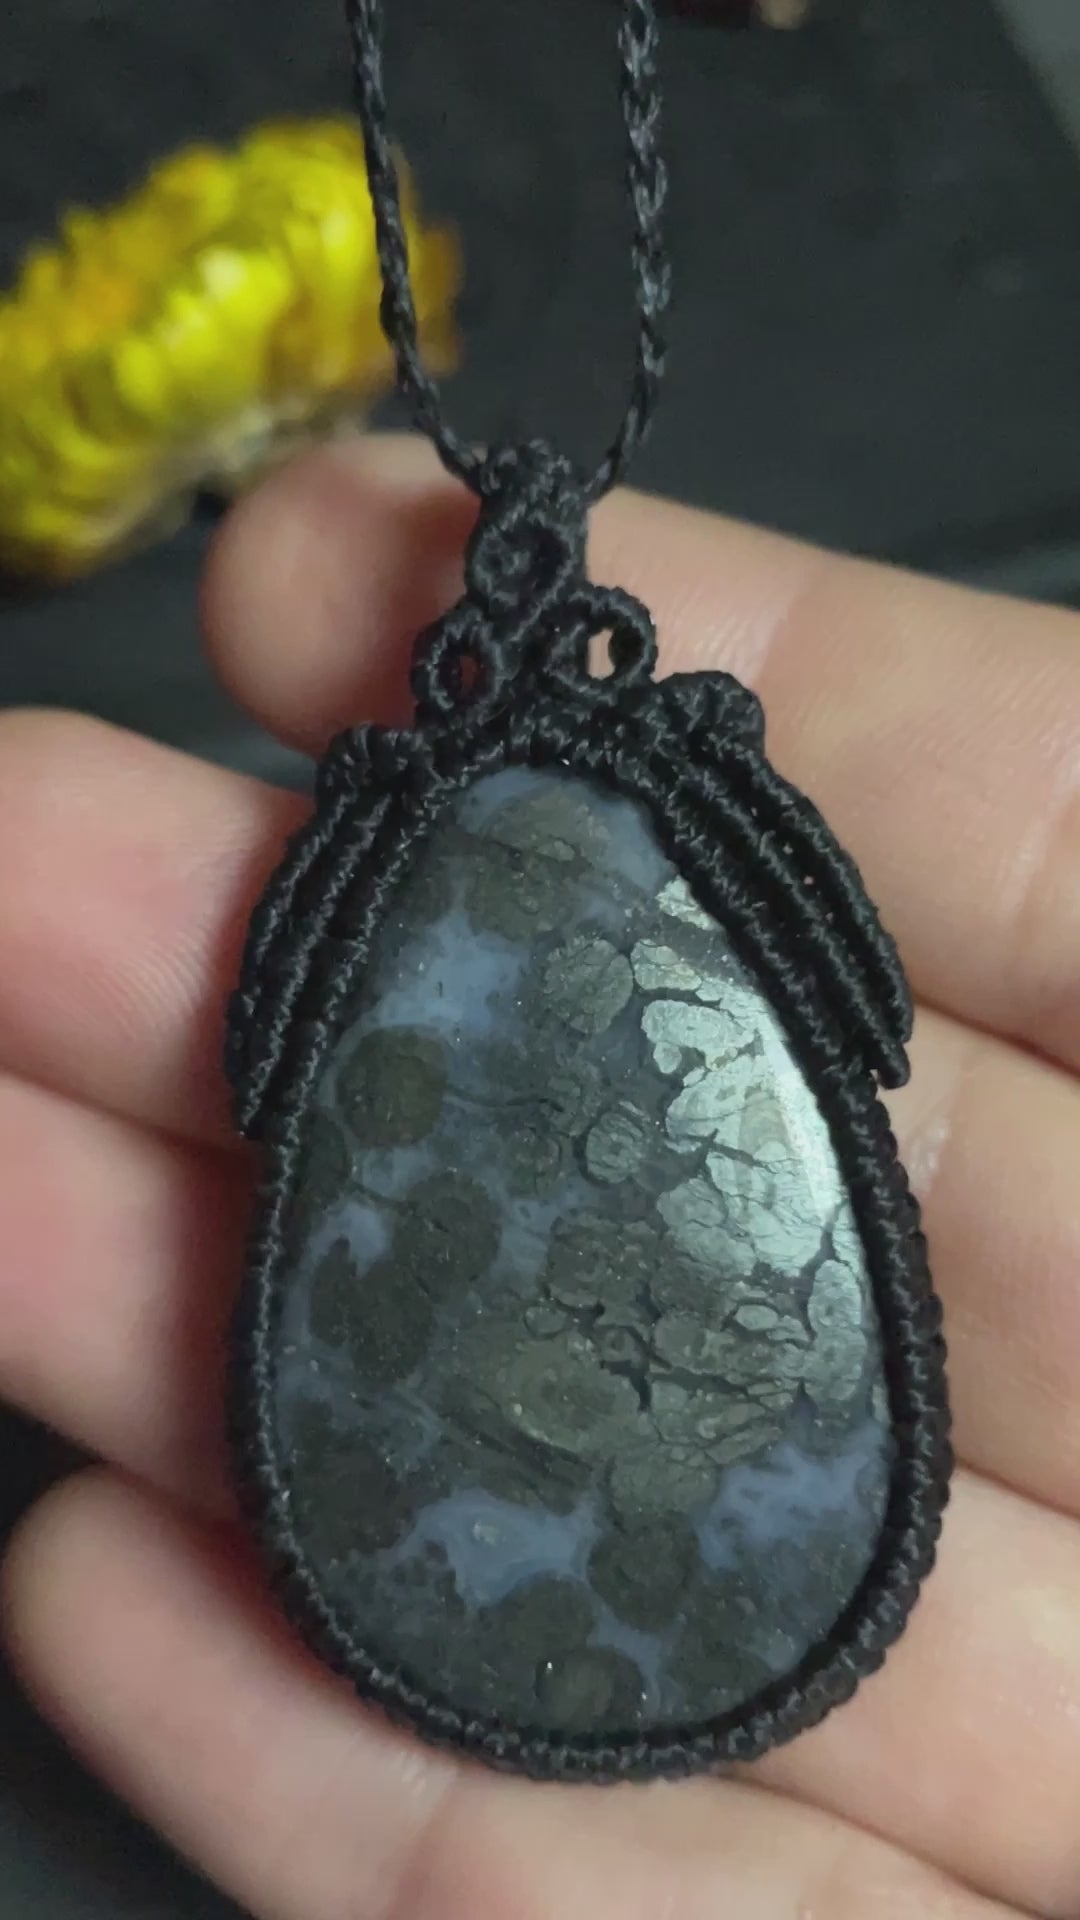 Pictured is a marcasite in agate cabochon wrapped in macrame thread. A gothic book and flowers are nearby.